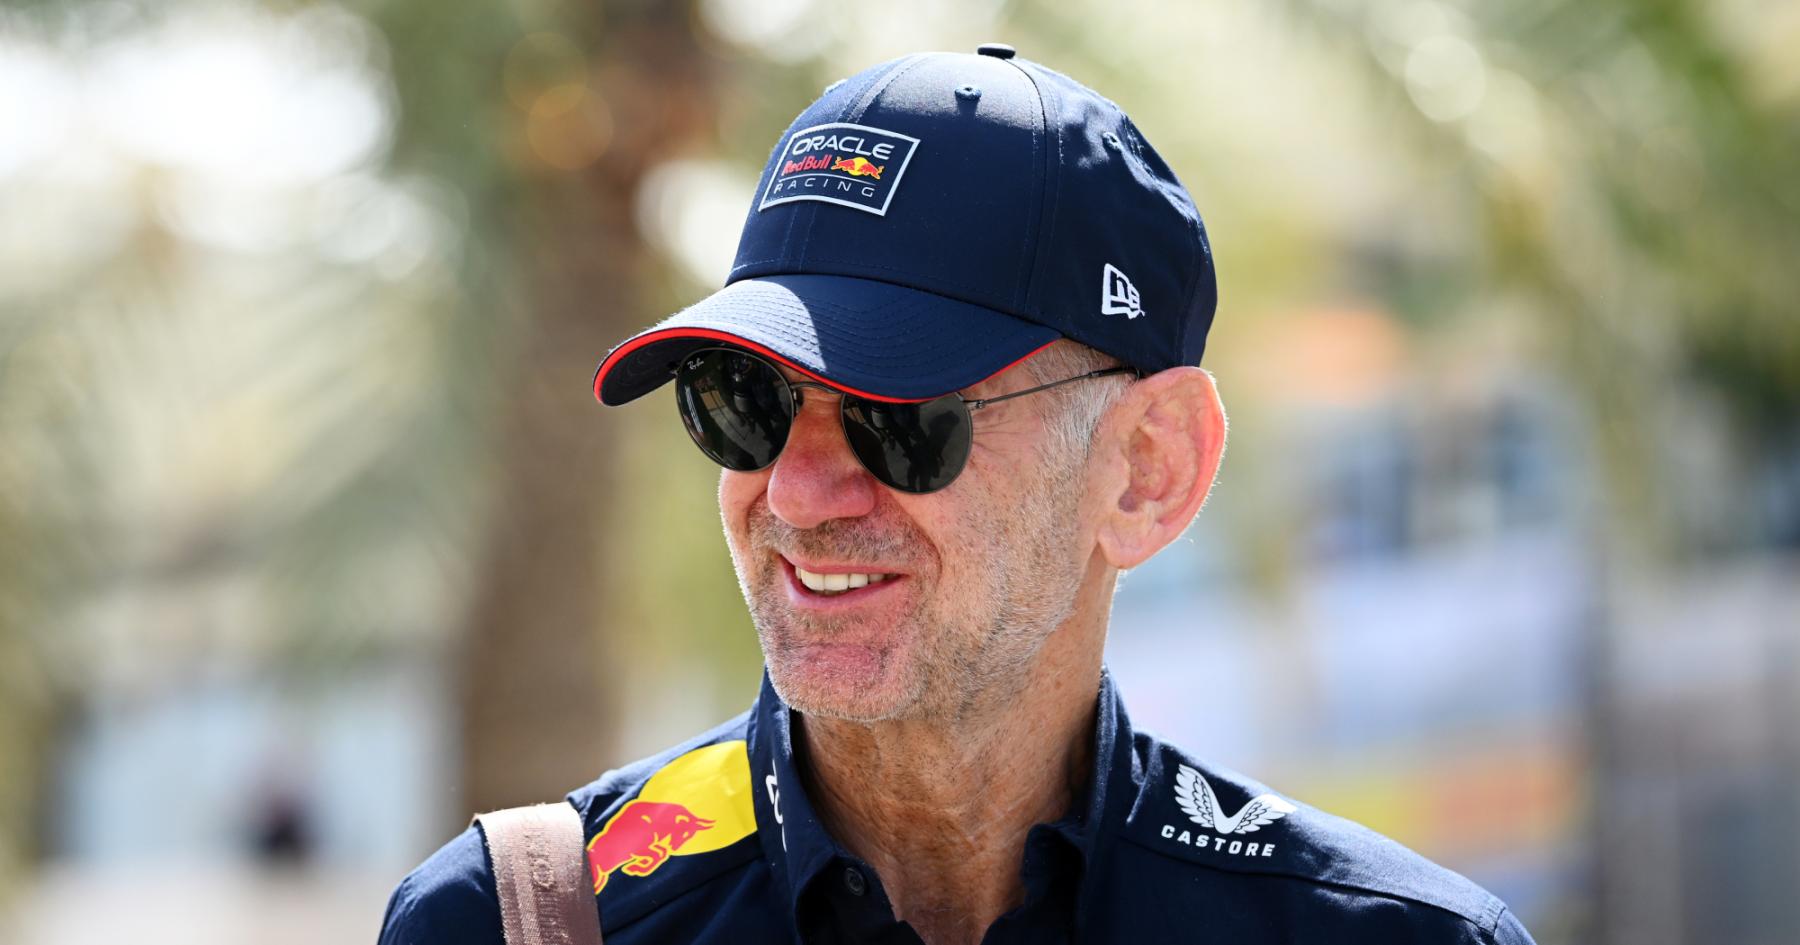 The Dawn of Dominance: Red Bull's Newey-Led Project and Ferrari's Revamped Strategy Take Center Stage - A RacingNews365 Review